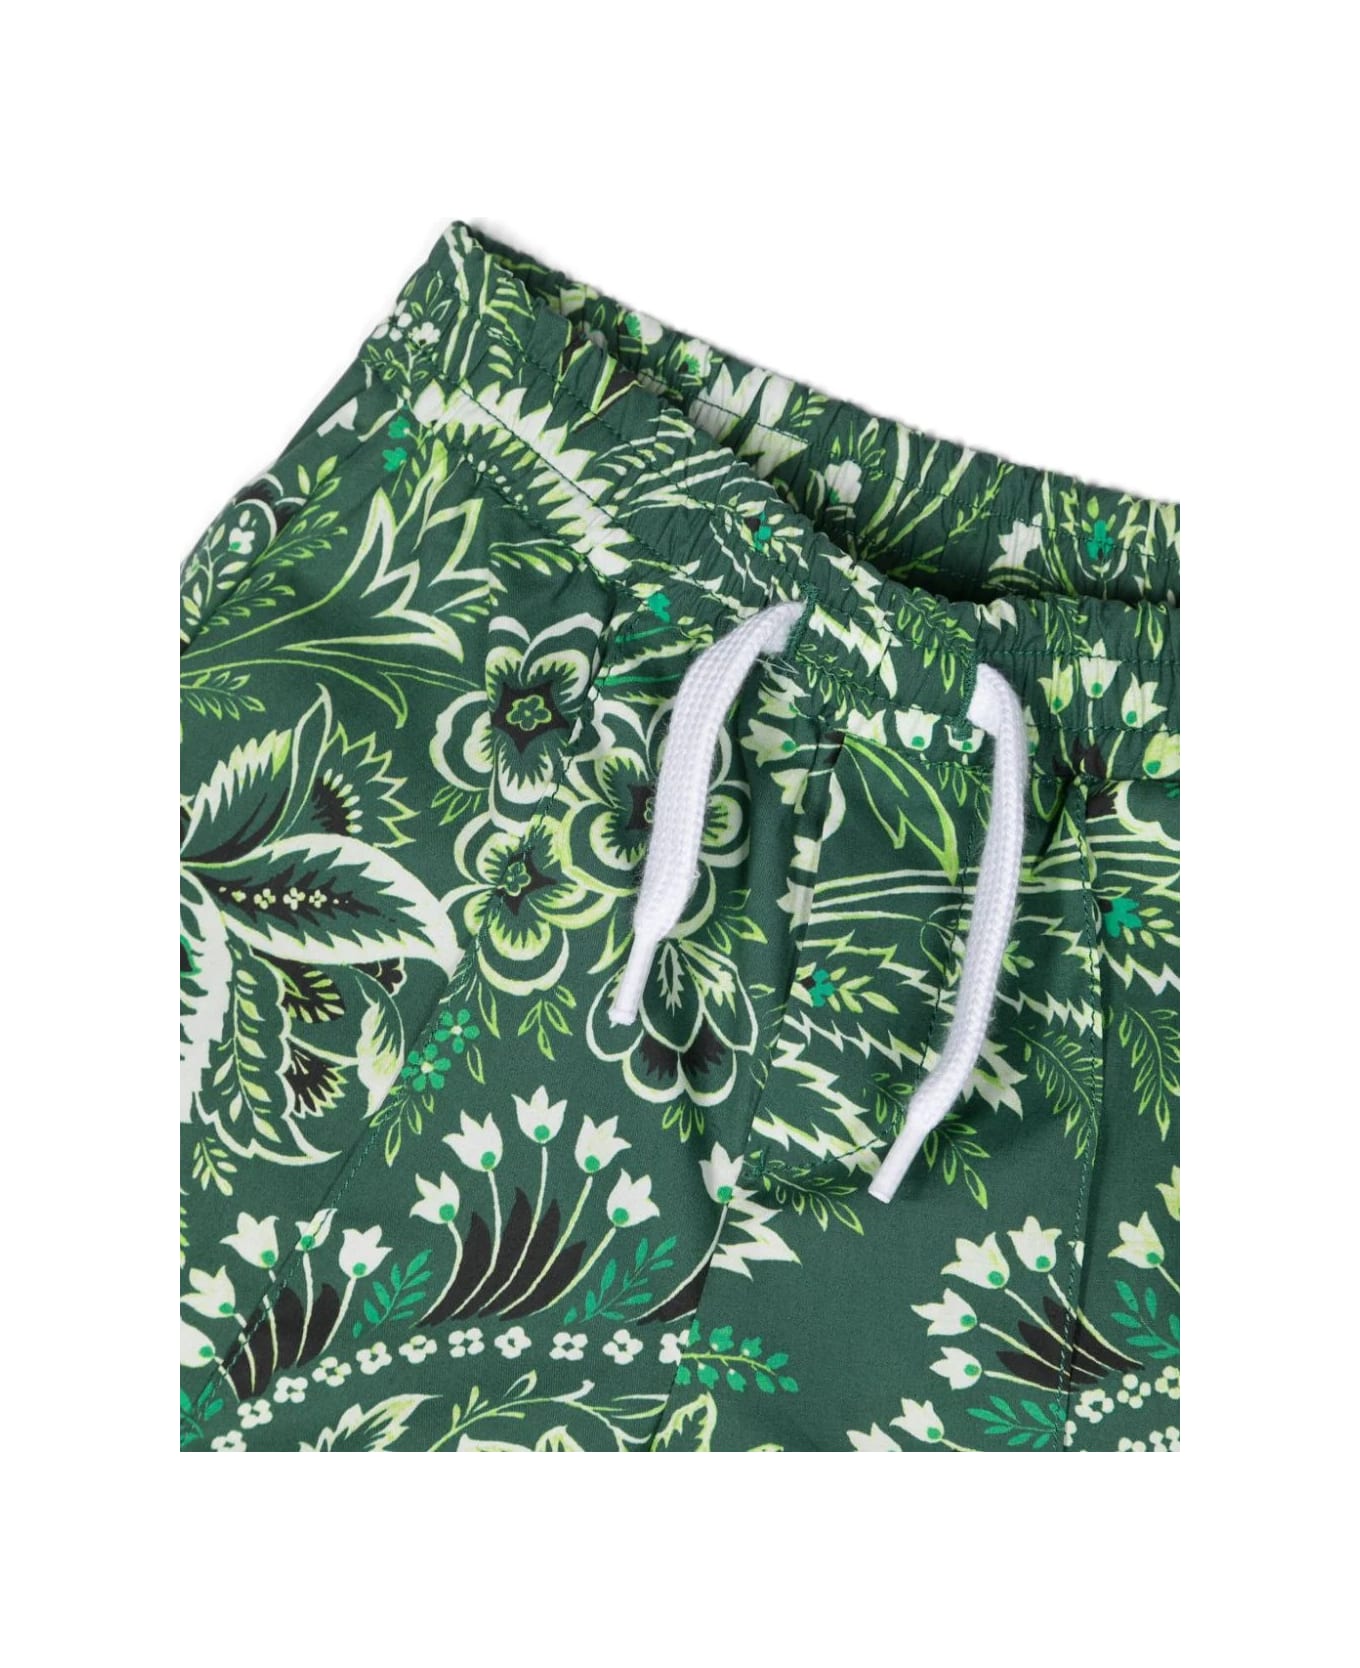 Etro Shorts With Green Paisley Print - Green